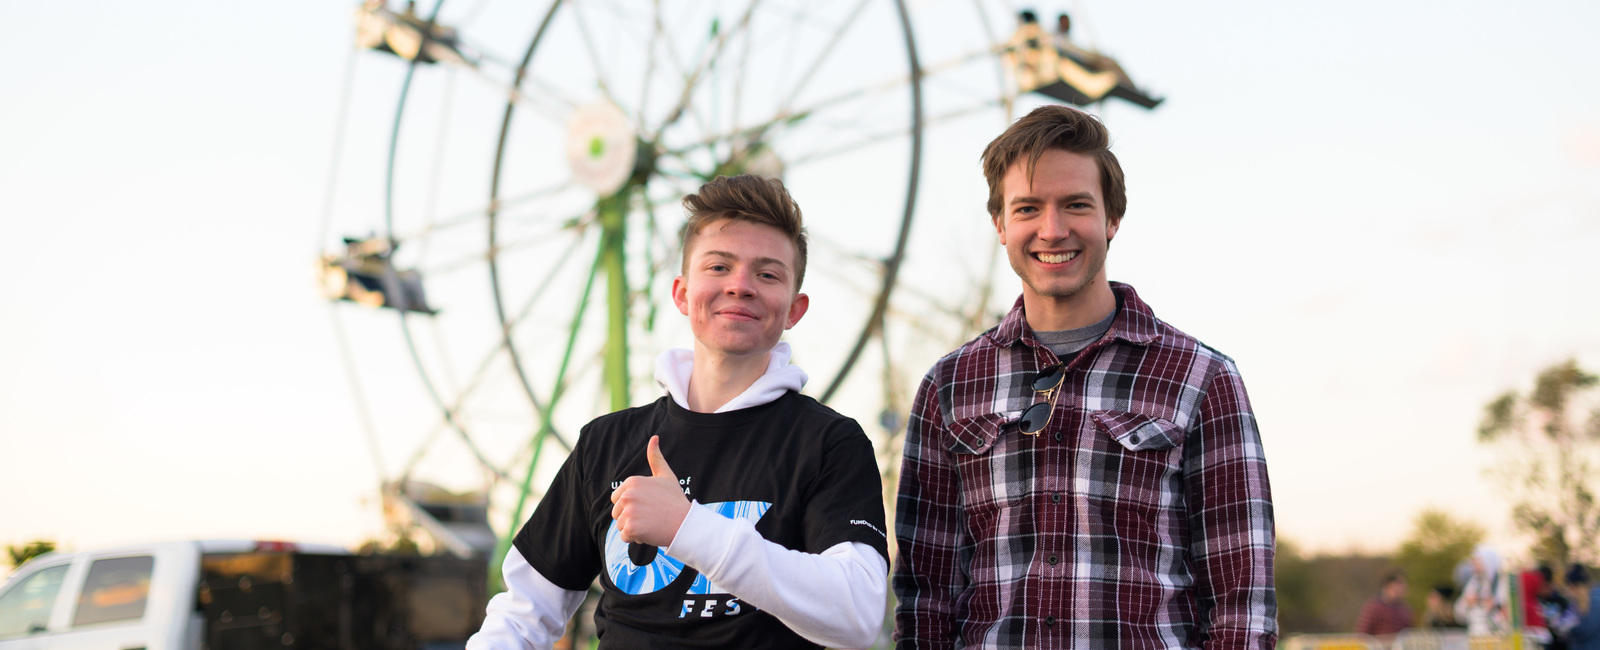 Two male students smiling with a ferris wheel in the background at OZ Fest